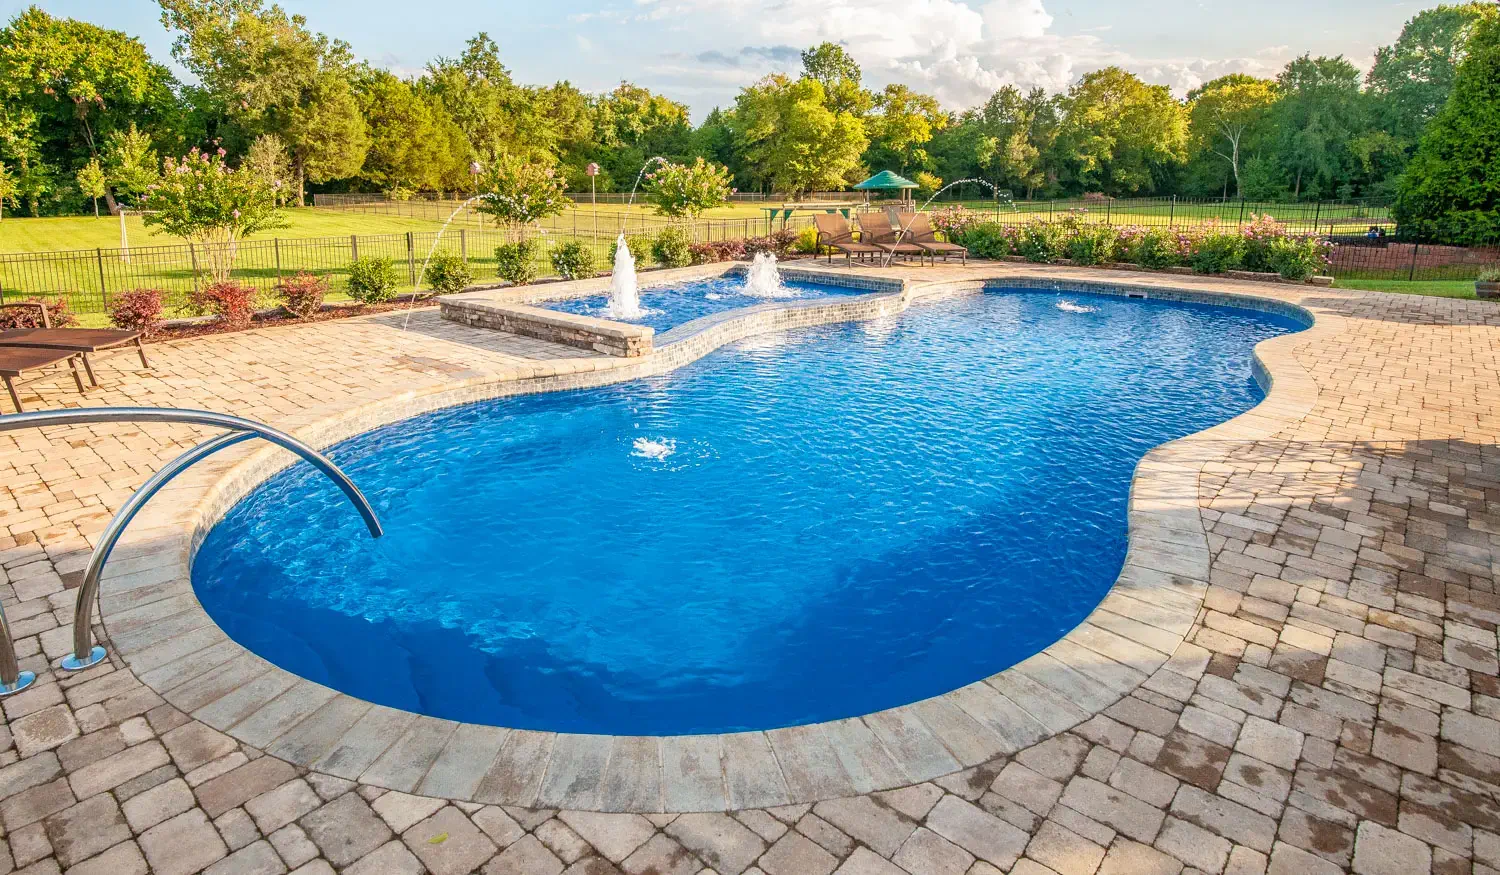 Top Myths About Pool Ownership